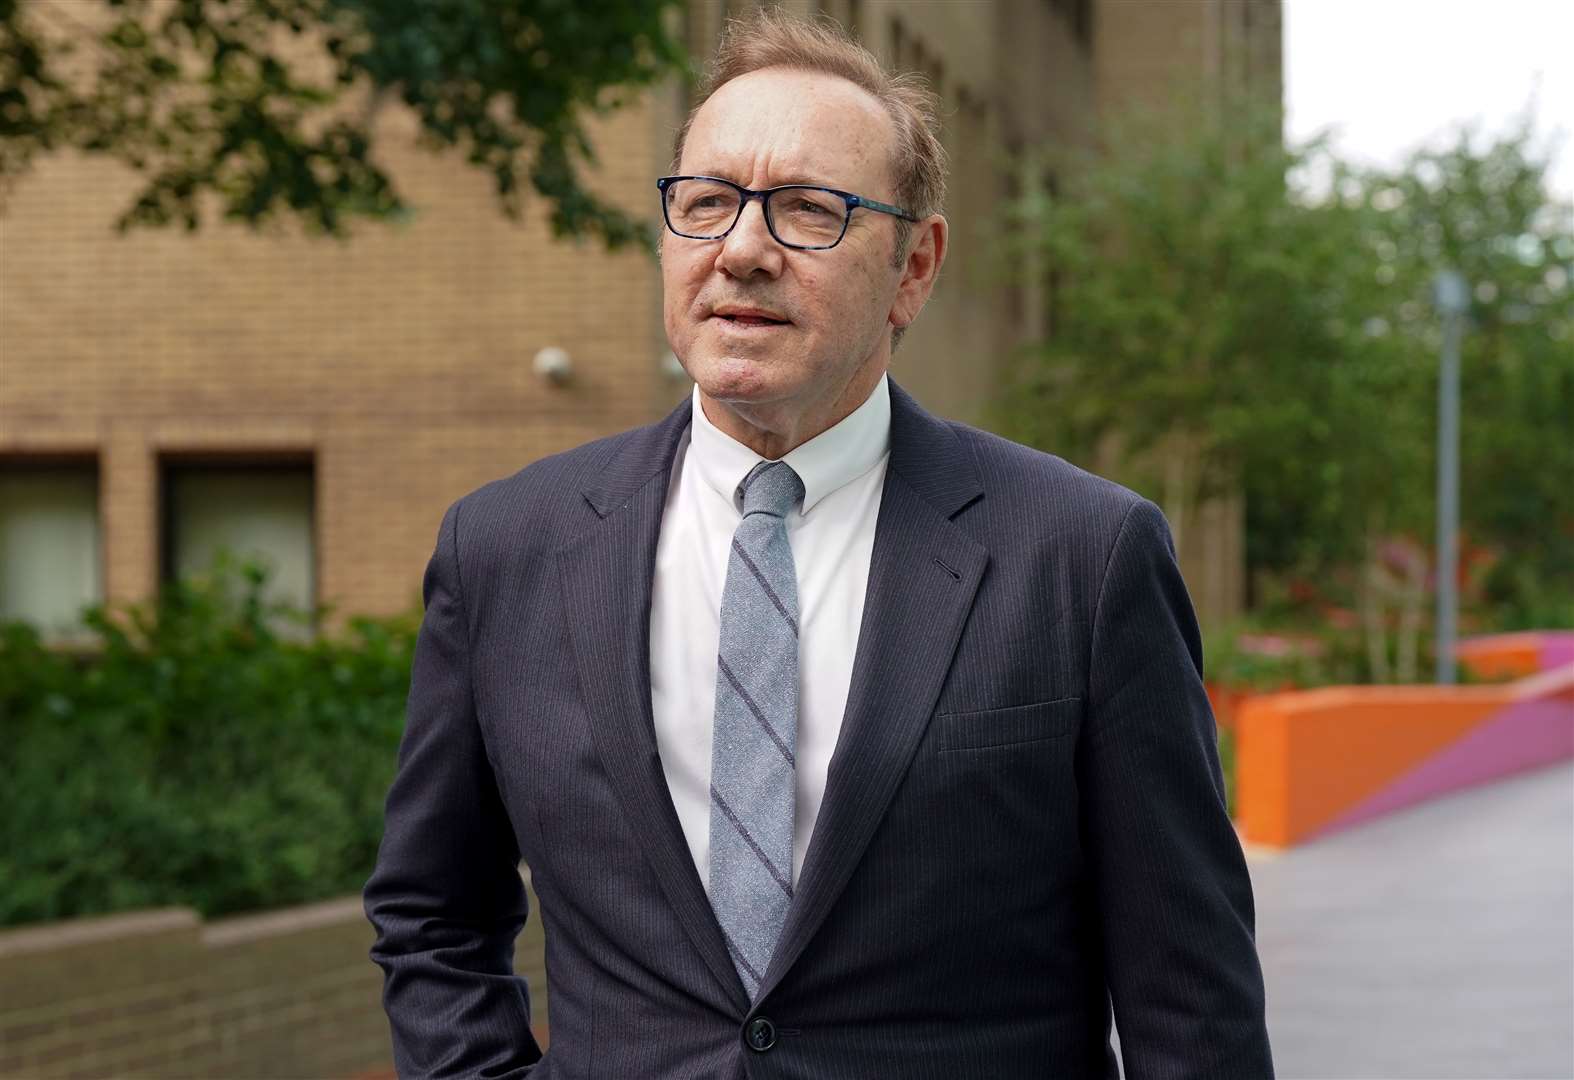 The prosecution concluded its case against Spacey on Wednesday (Lucy North/PA)